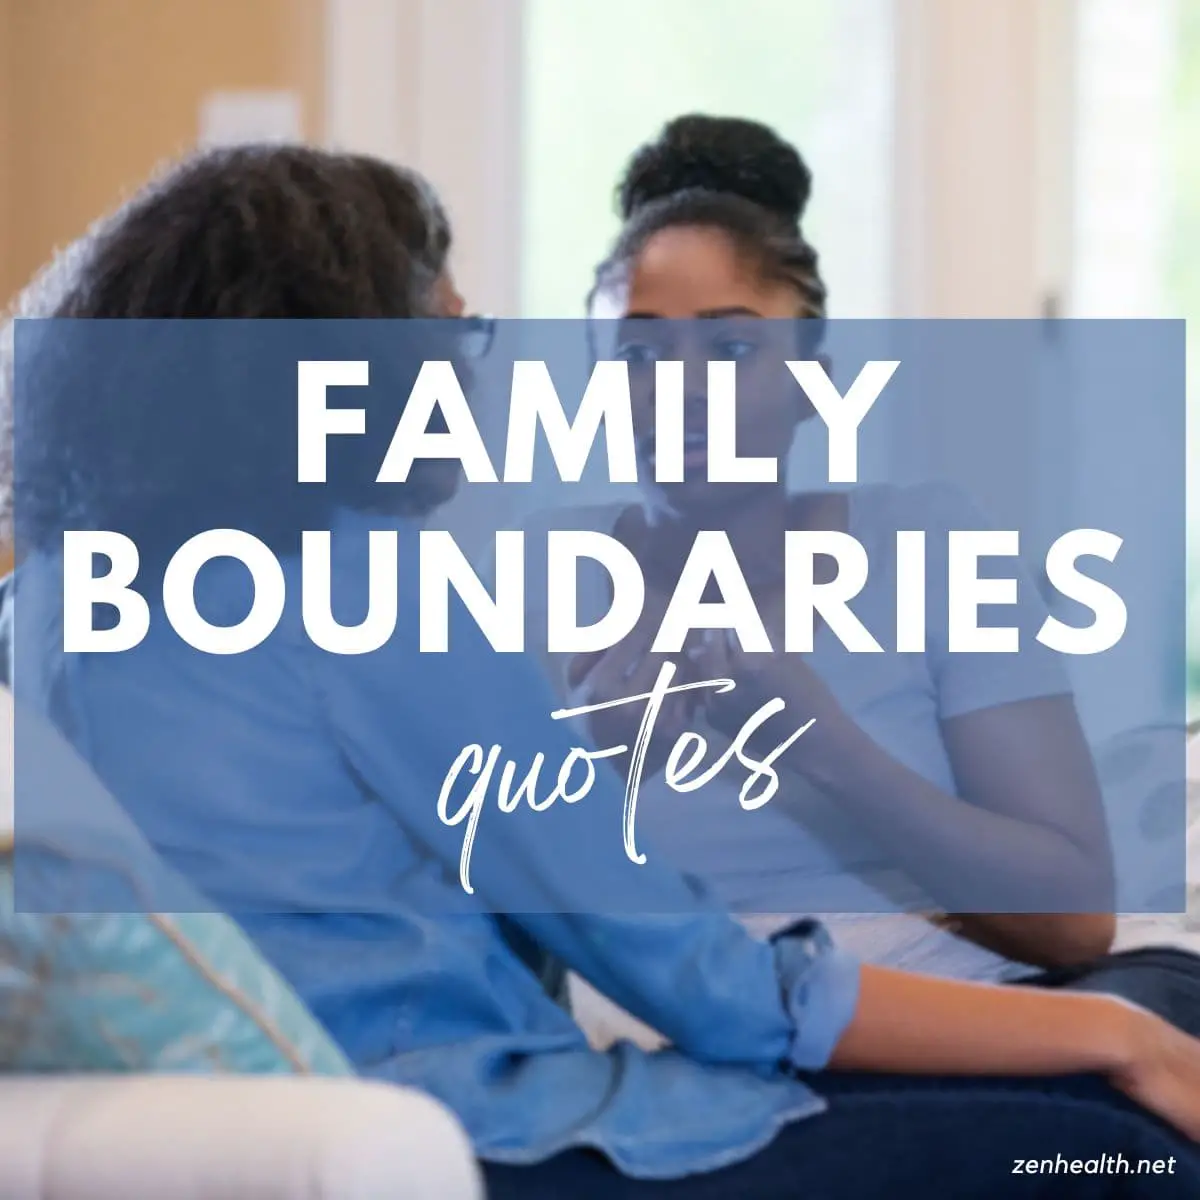 22 Helpful Family Boundaries Quotes to Think About